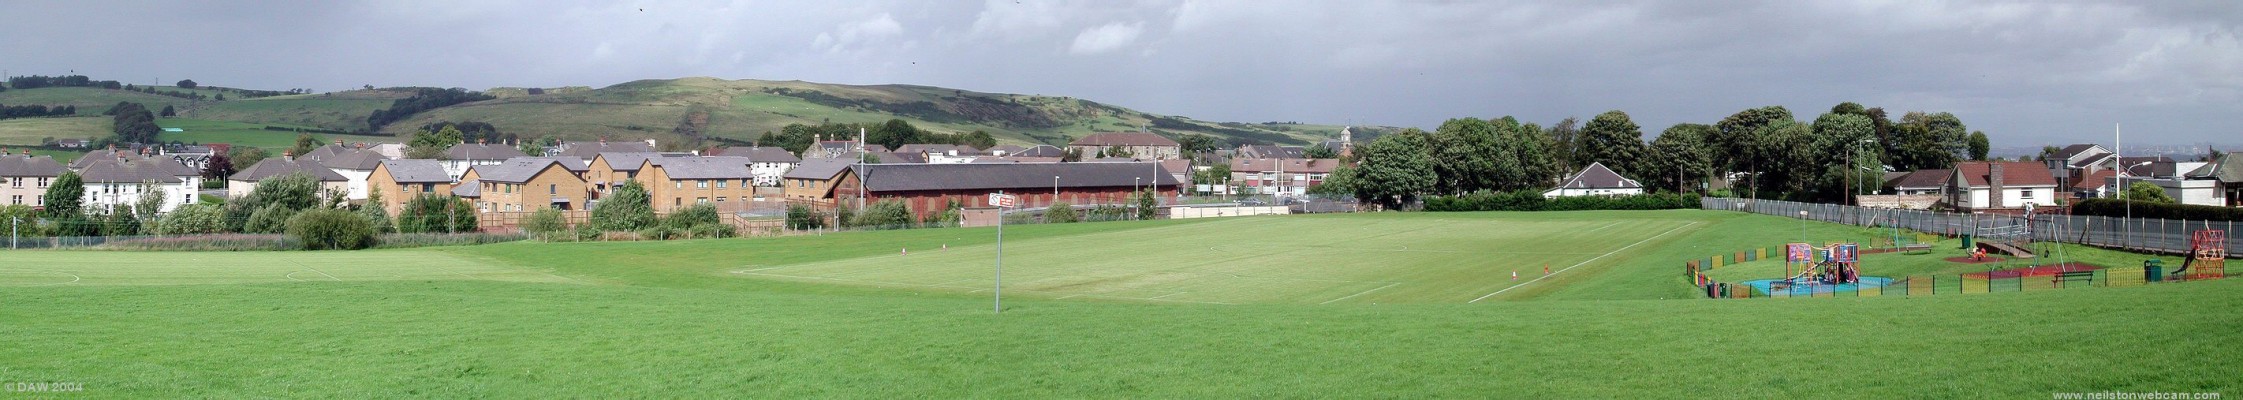 Neilston Playing fields, August 2004
The fereneze hills can be seen in the background, in the centre is the old goods shed at the railway station, now surrounded by a new housing development.  On the extreme right is the flagpole at the Neilston Bowling Club, the towerblocks of Glasgow can be seen in the distance above the club house.
